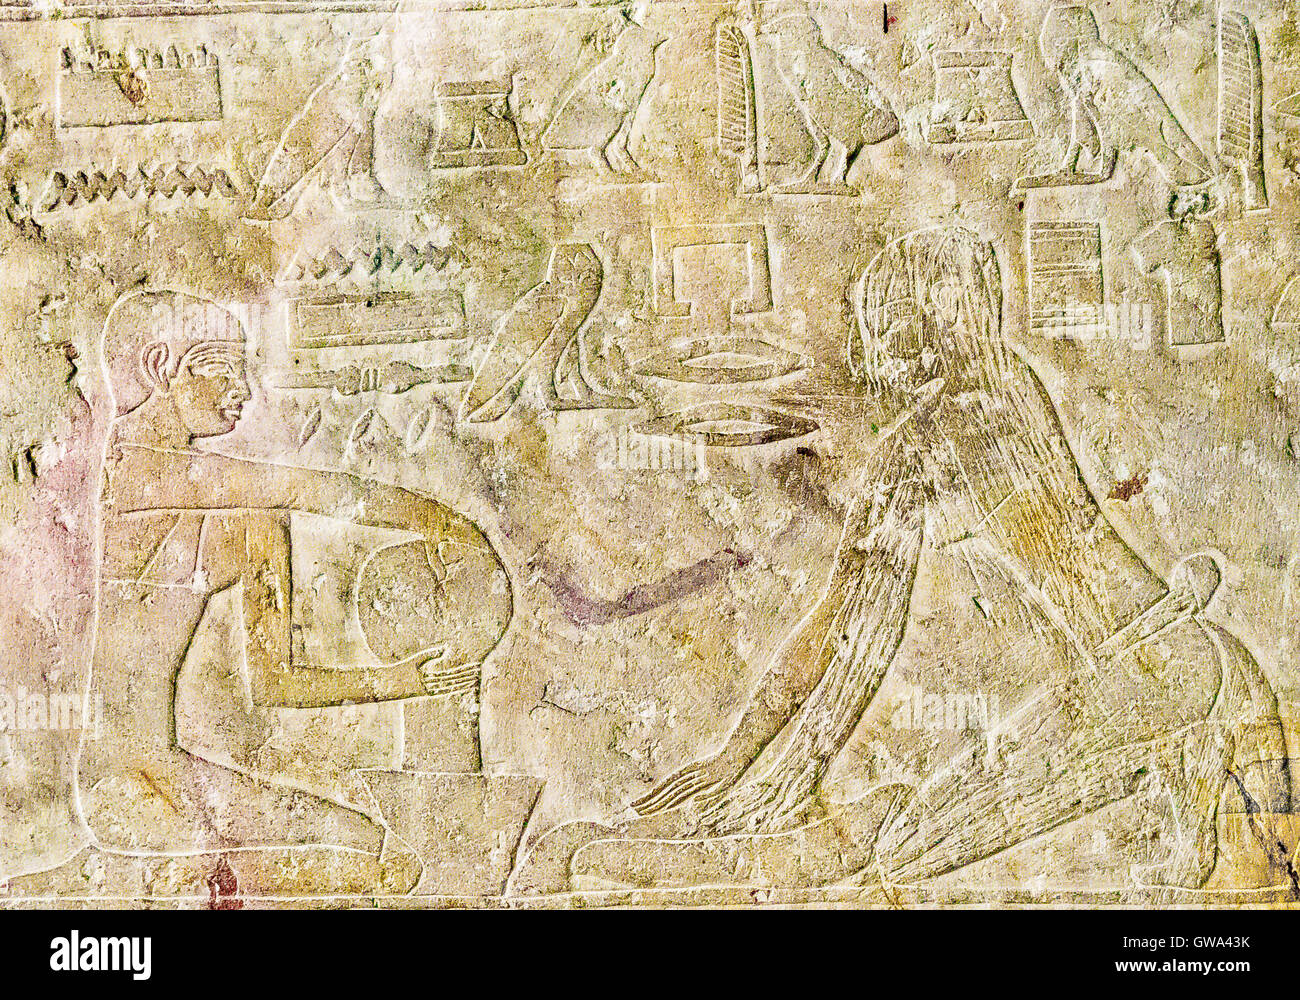 Egypt, Cairo, Egyptian Museum, from the tomb of Kaemrehu, Saqqara, detail of a big relief depicting agricultural scenes. Stock Photo